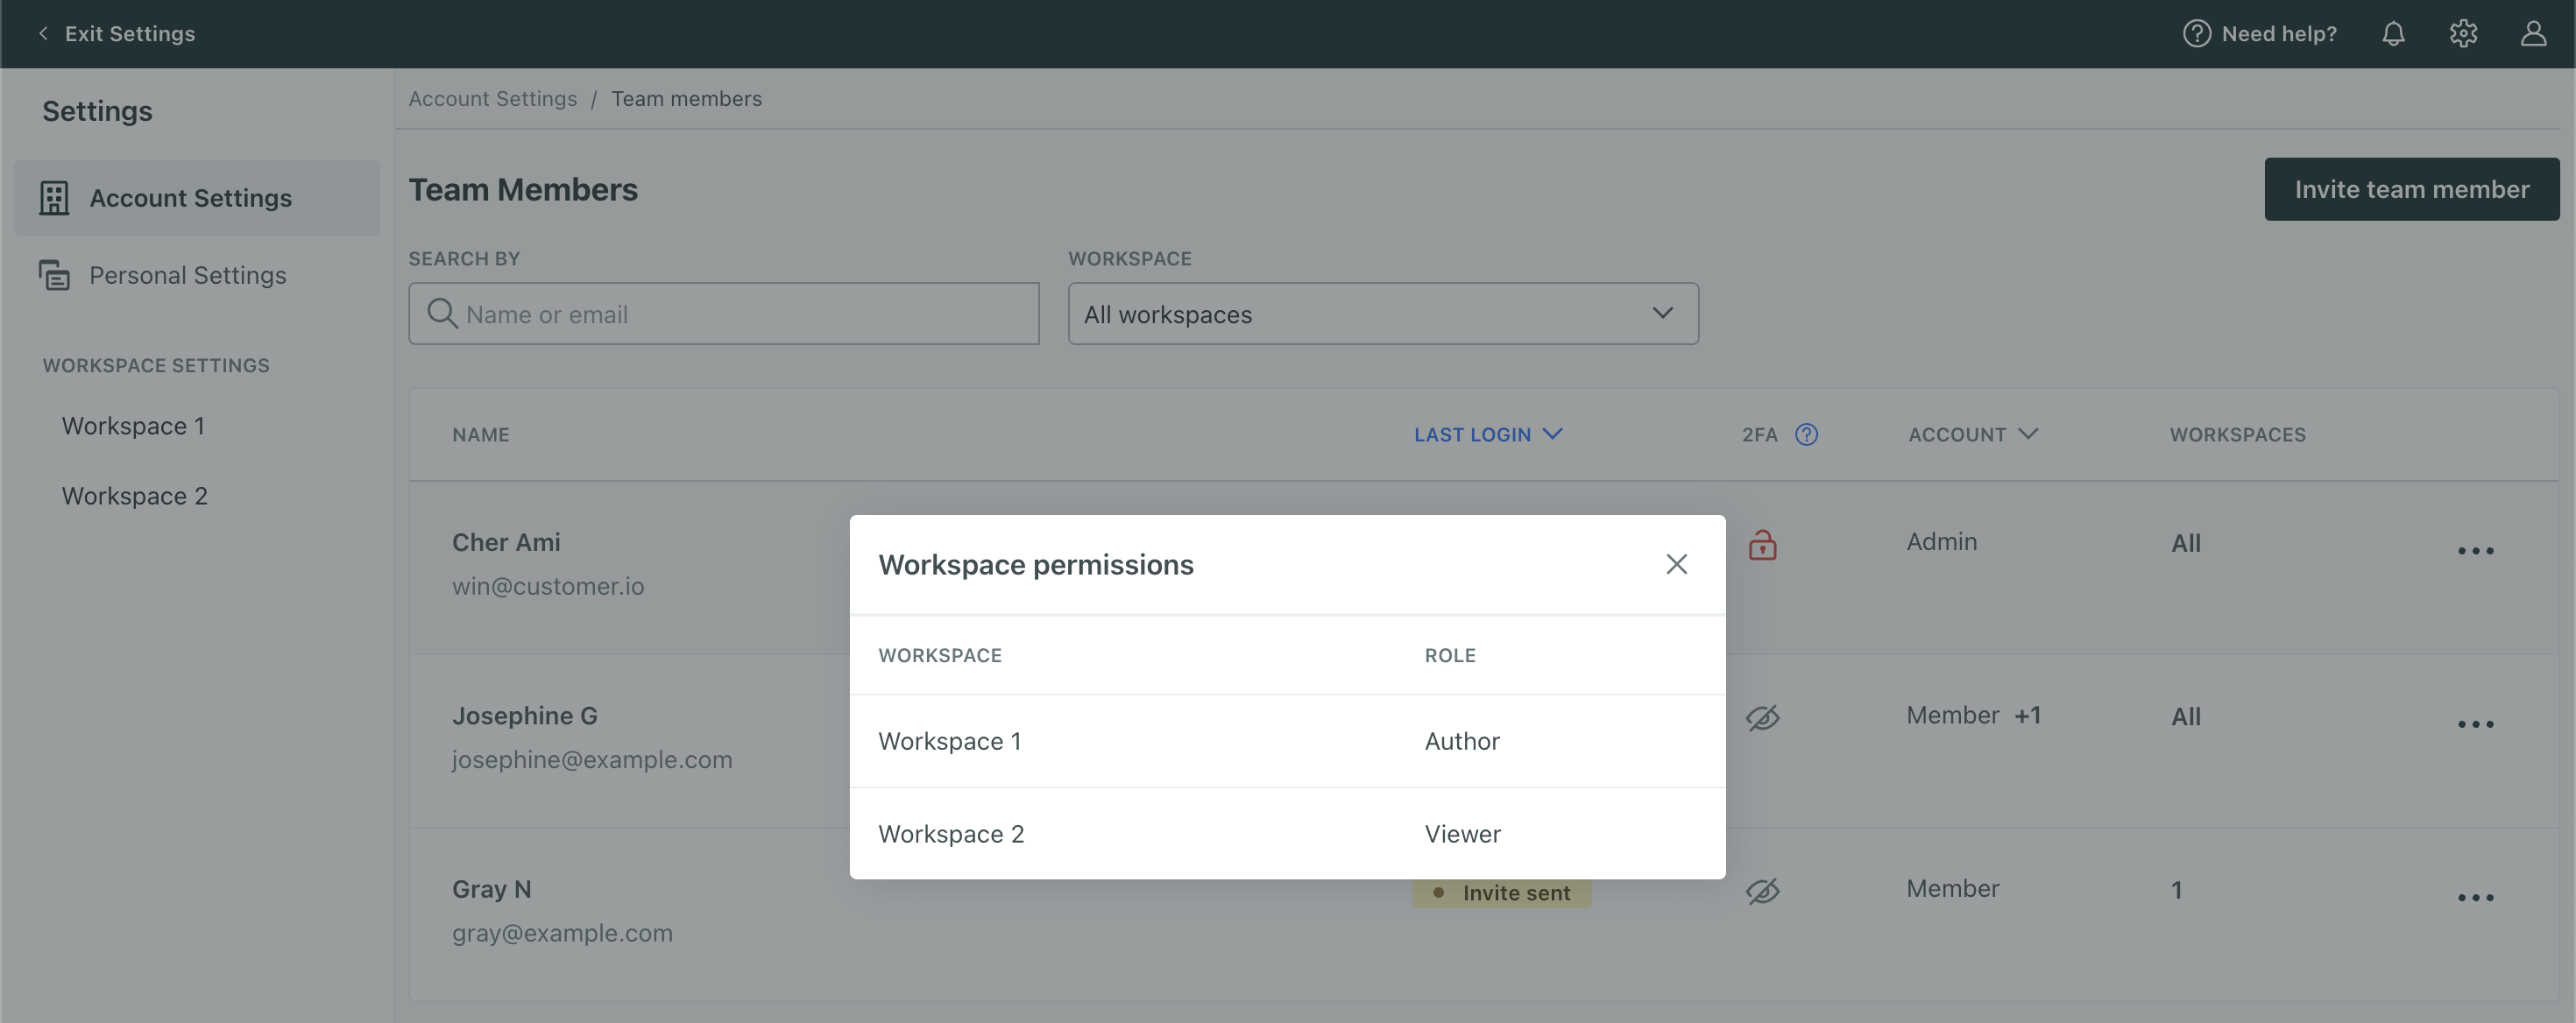 On the Team Member page, a pop-up appears showing a list of workspaces a team member has access to. In Workspace 1, they have the role of Author. In Workspace 2, they have the role of Viewer.